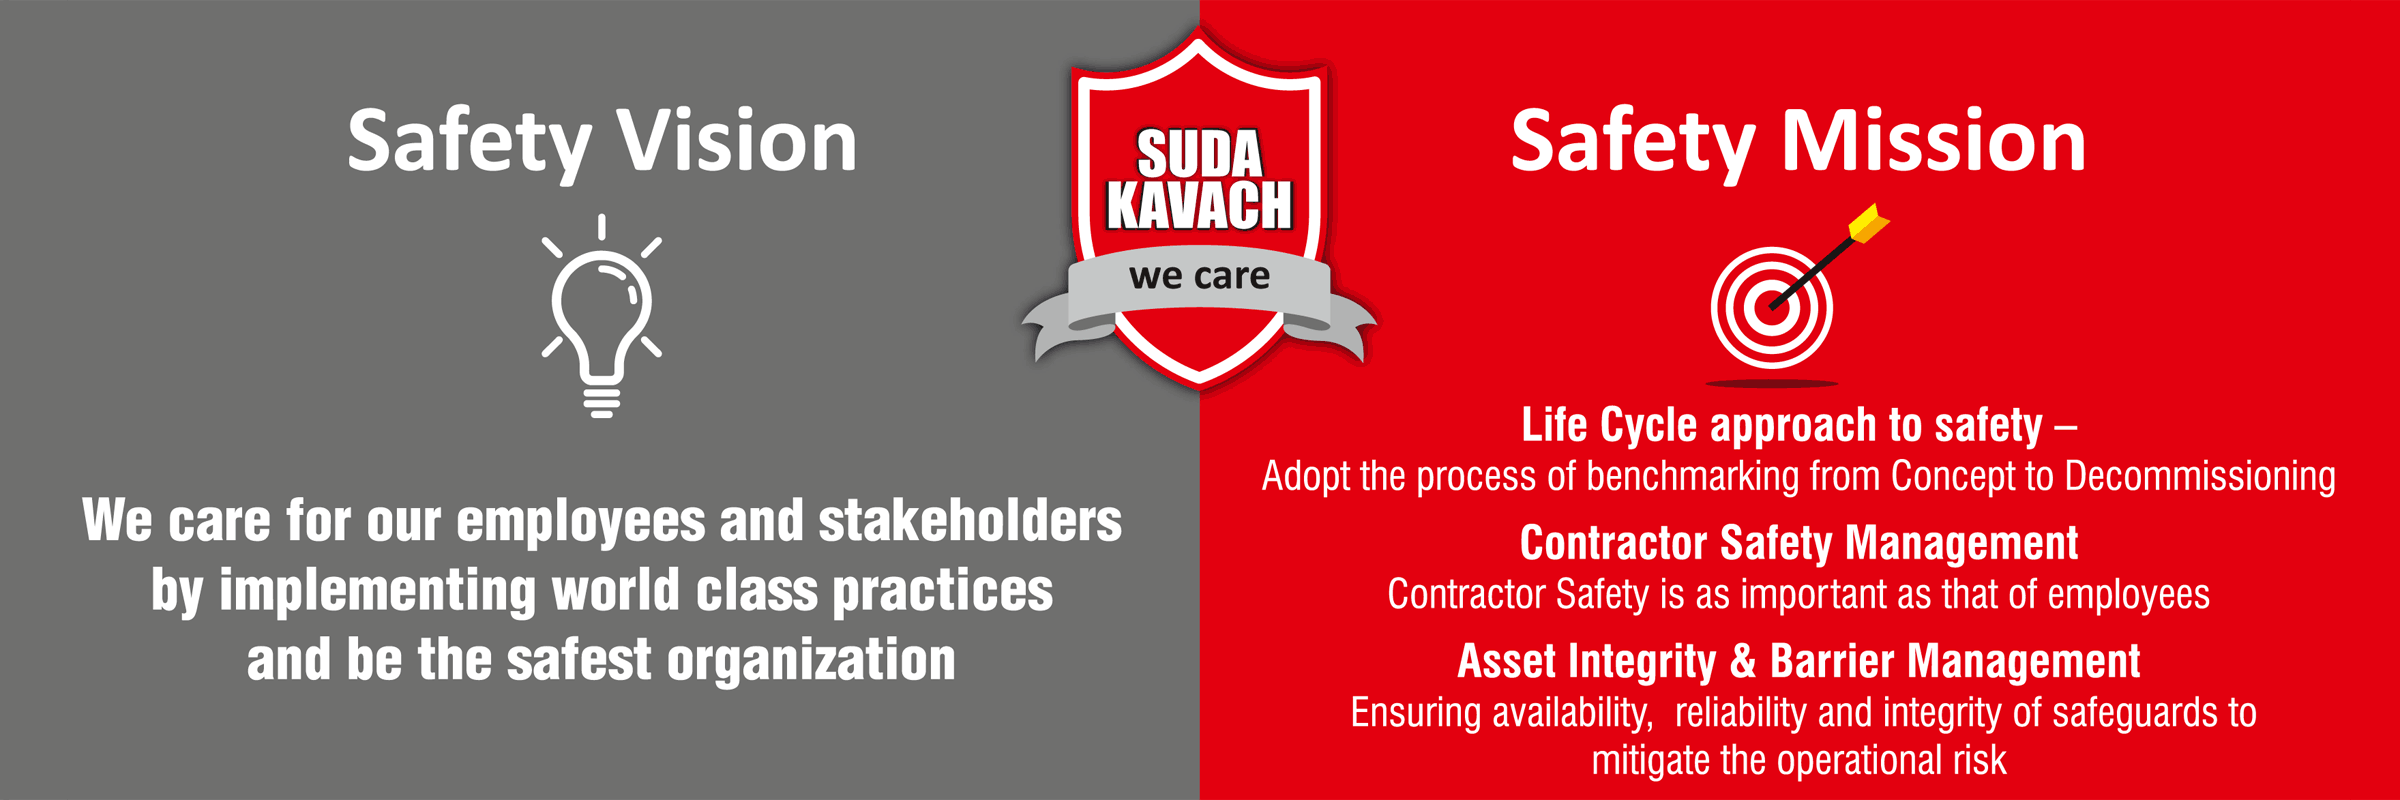 Sudarshan is committed to Process Safety Management